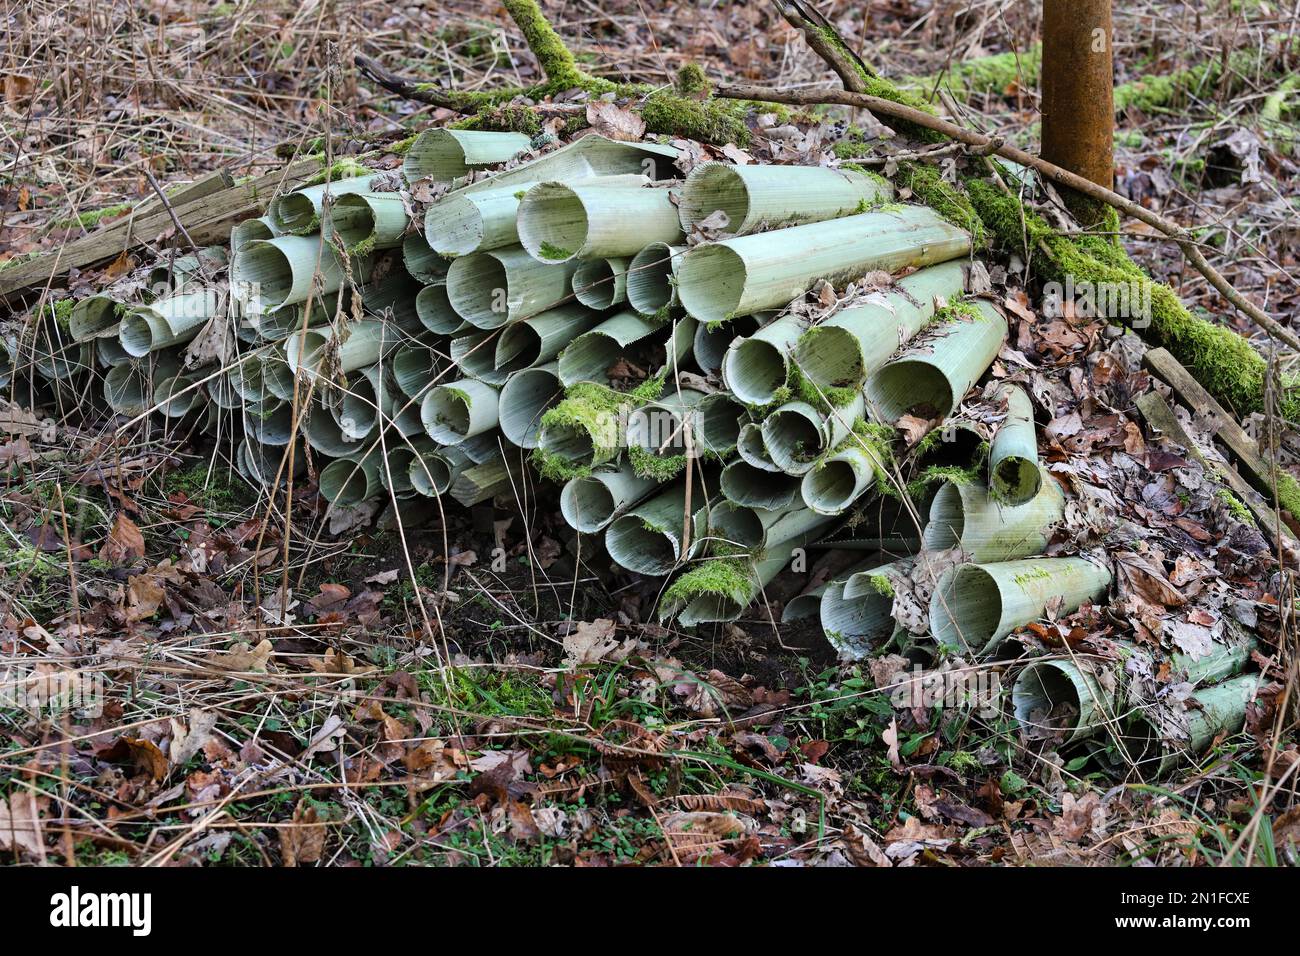 Used Plastic Tree Guards Left in a Woodland, UK Stock Photo